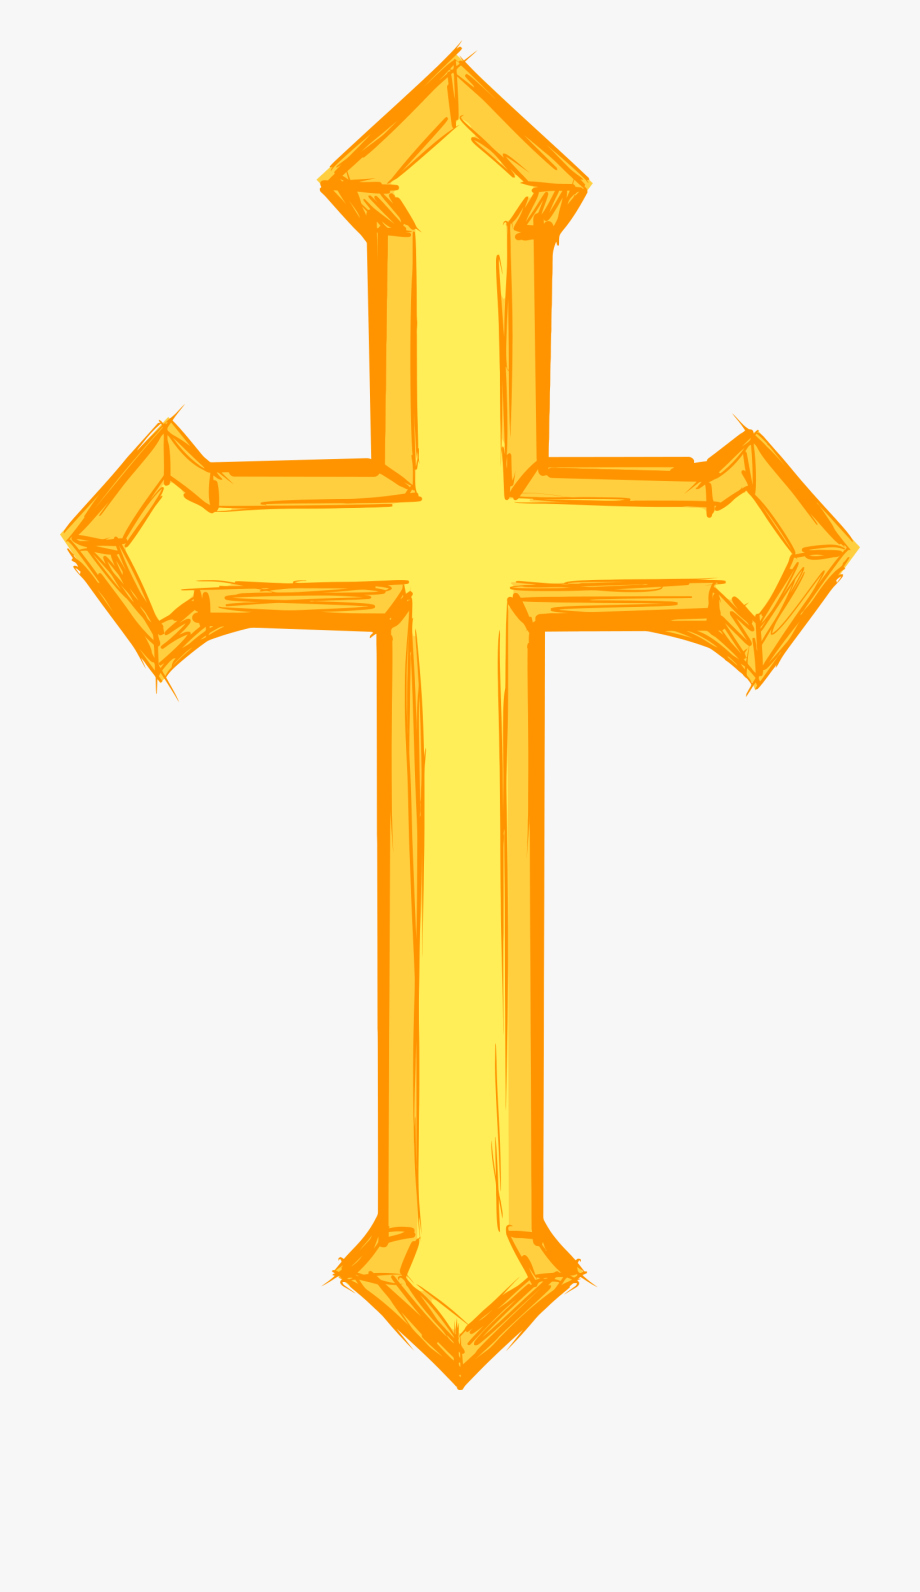 Christian Cross Crucifix Adult Support Group Christianity